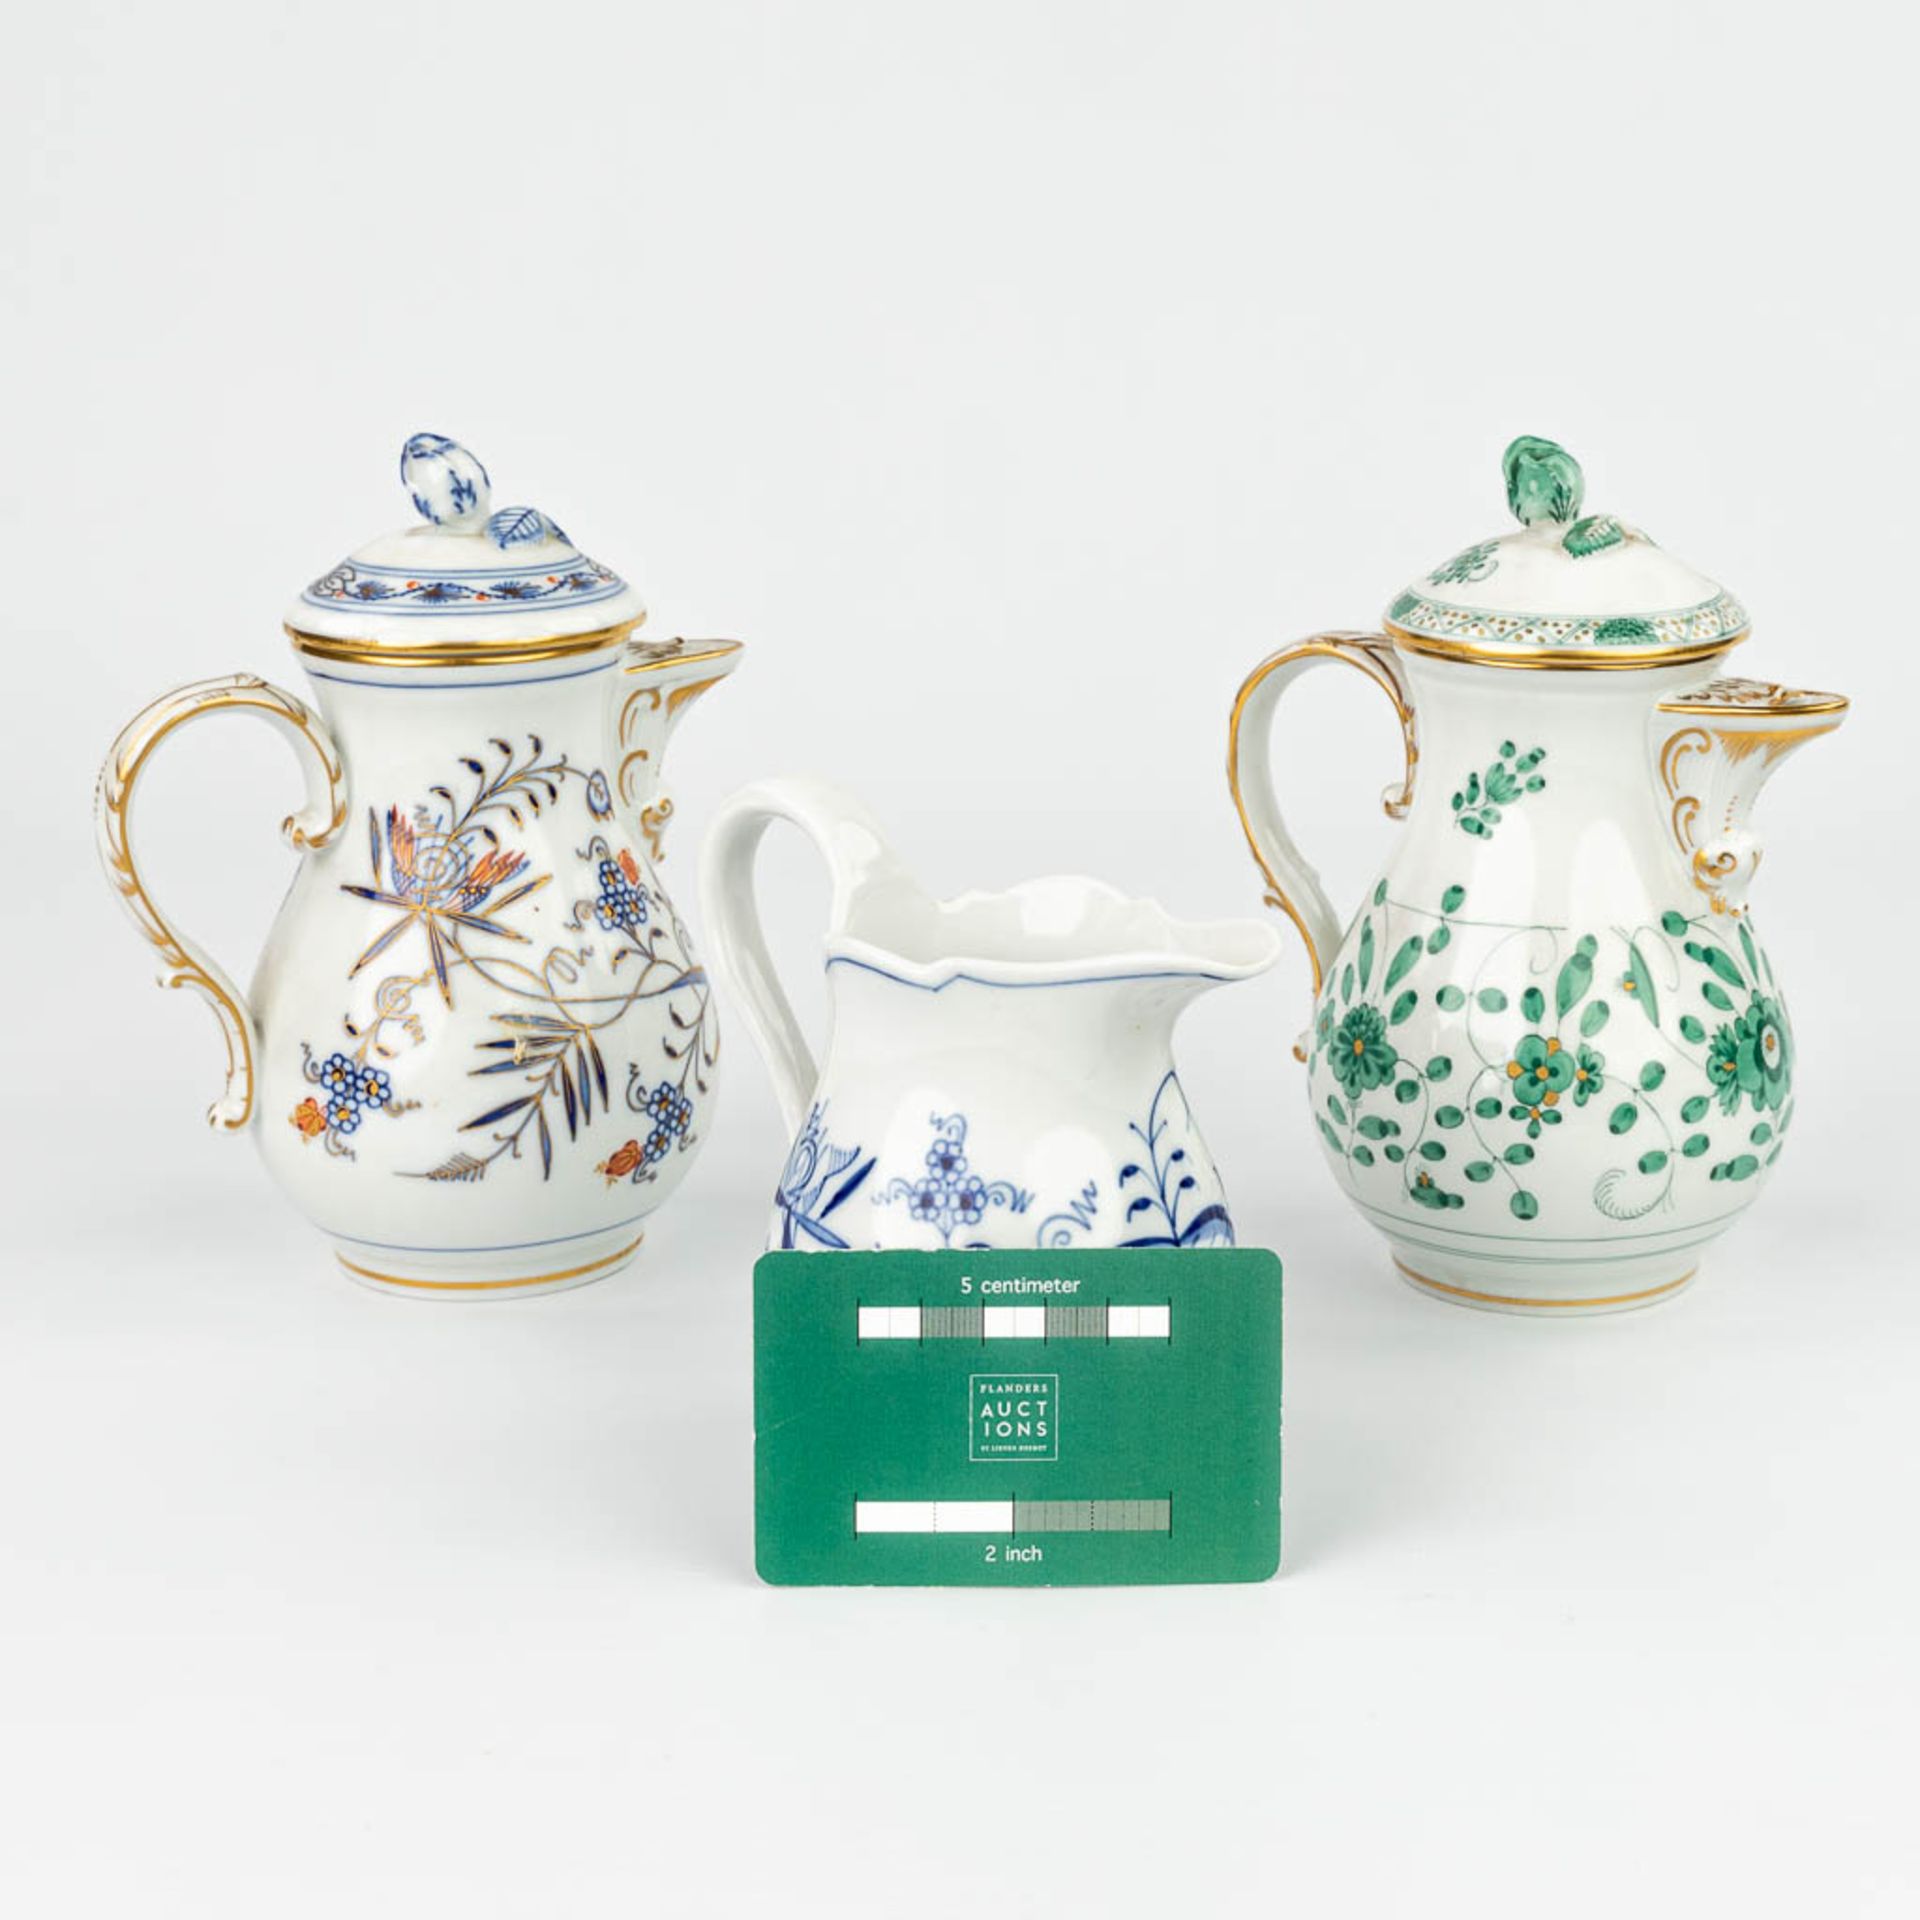 A collection of 2 coffee pots and a milk jug made by Meissen porcelain, 20th century. (H:17cm) - Image 14 of 17